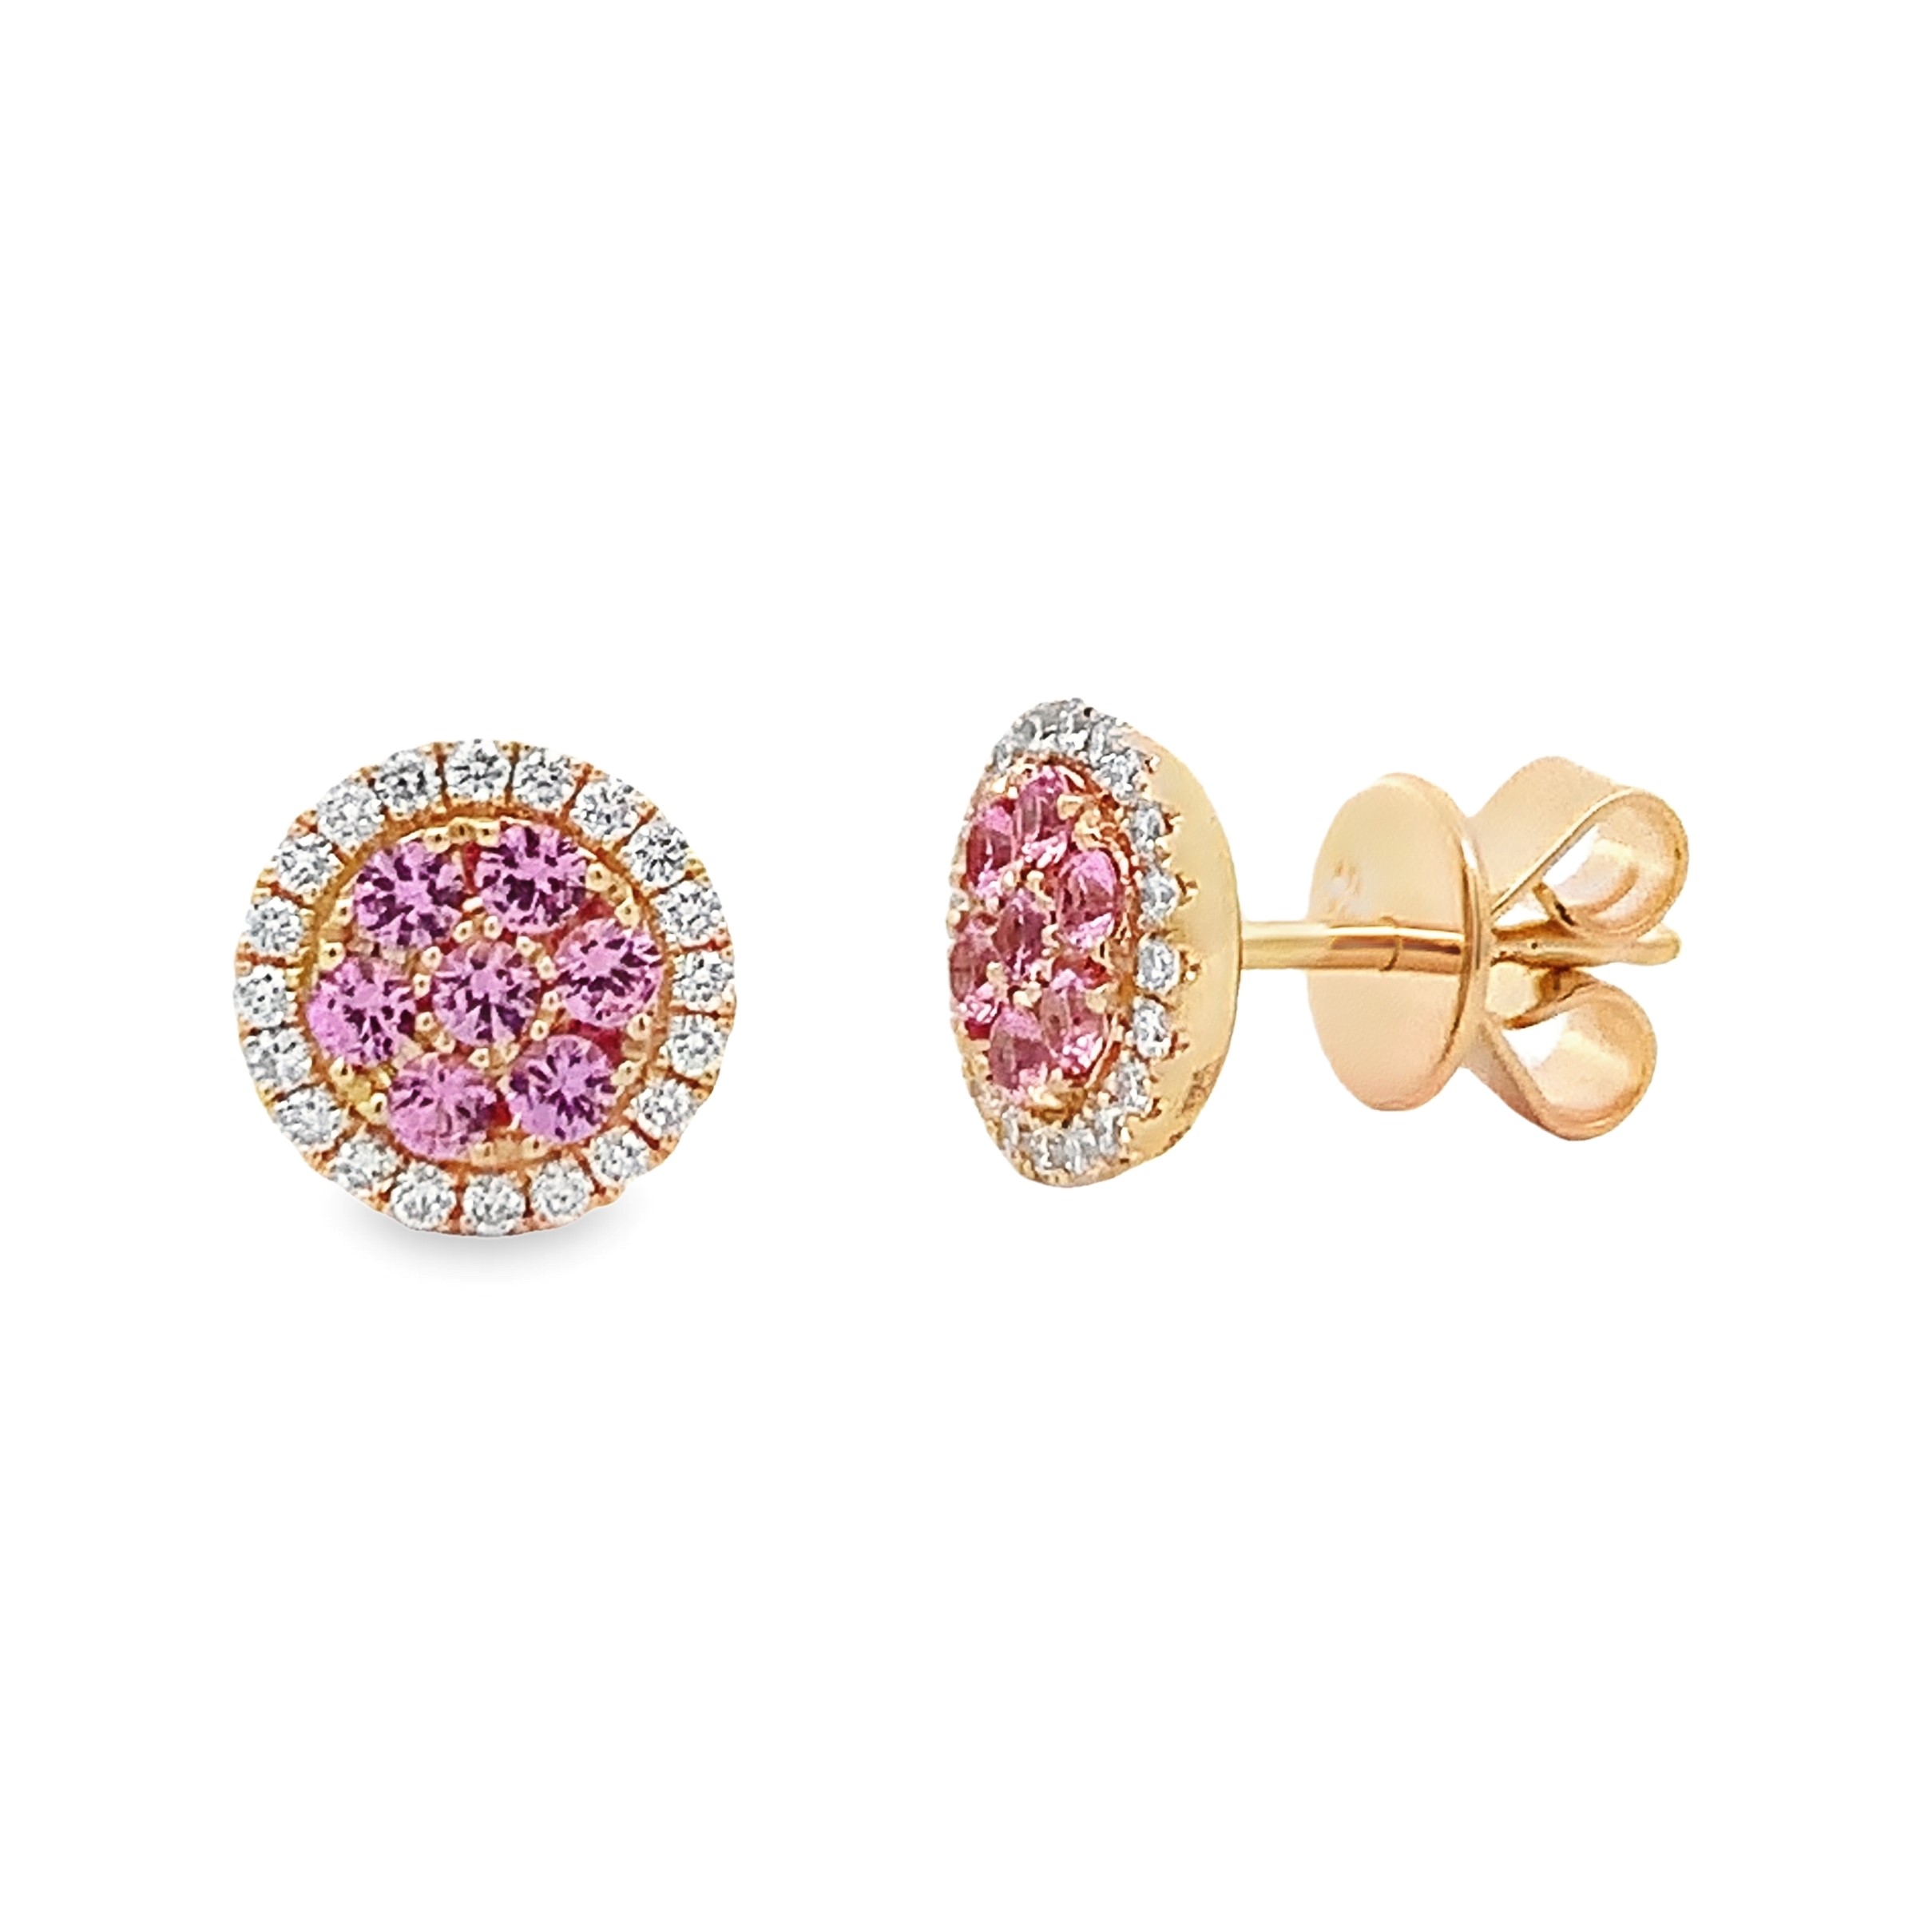 Frederic Sage 14K Yellow Gold Pink Sapphire Cluster Earrings